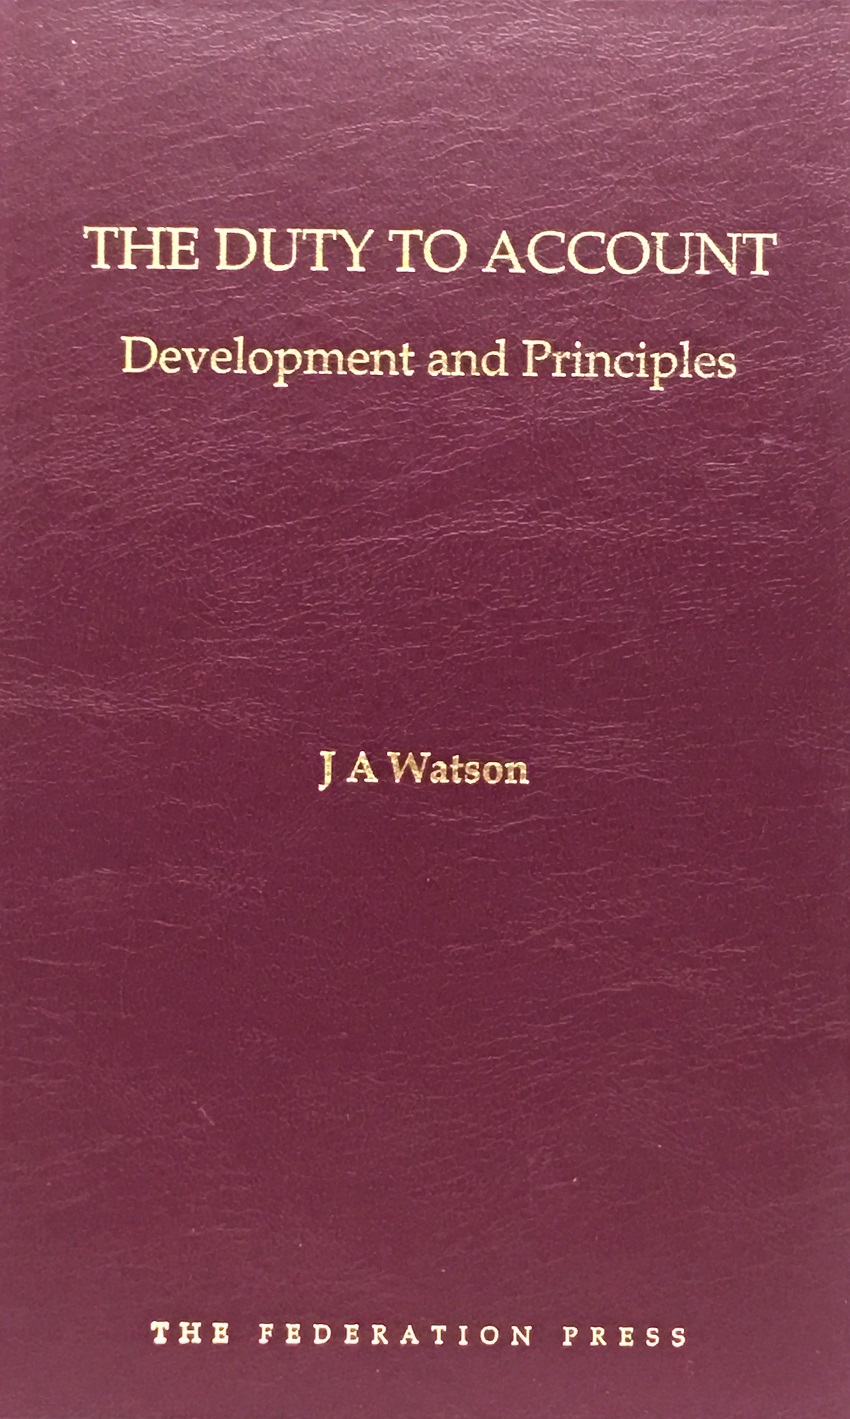 The Duty to Account - Development and Principles